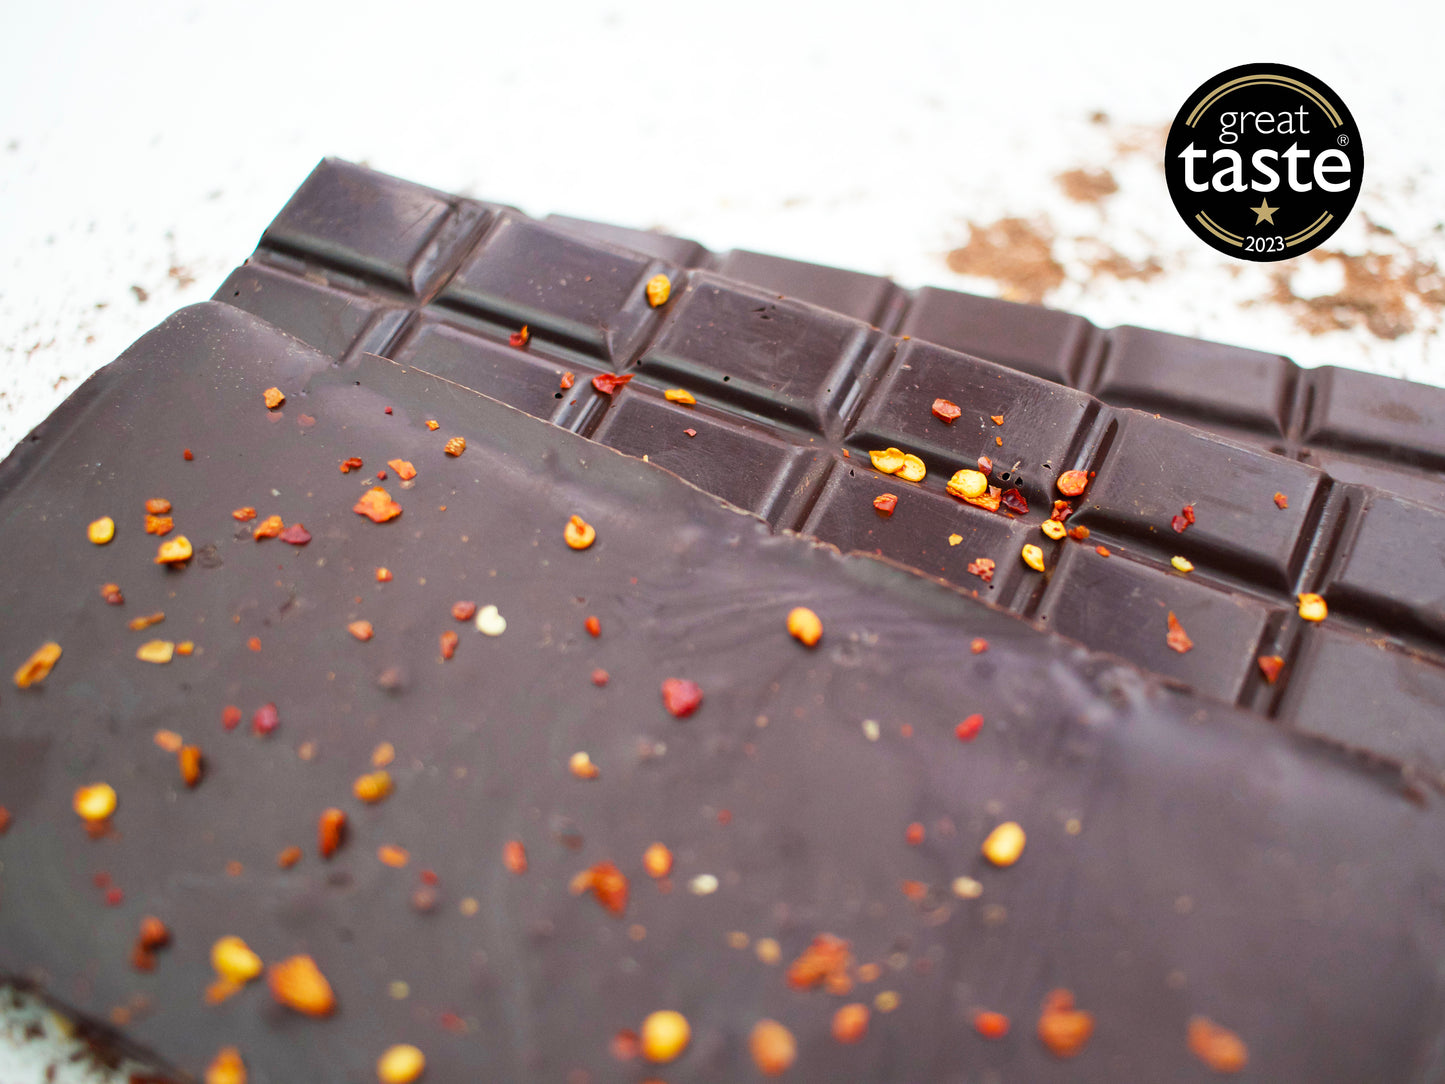 Image shows a group of 3, Great Taste gold star winning dark chocolate chilli bars.